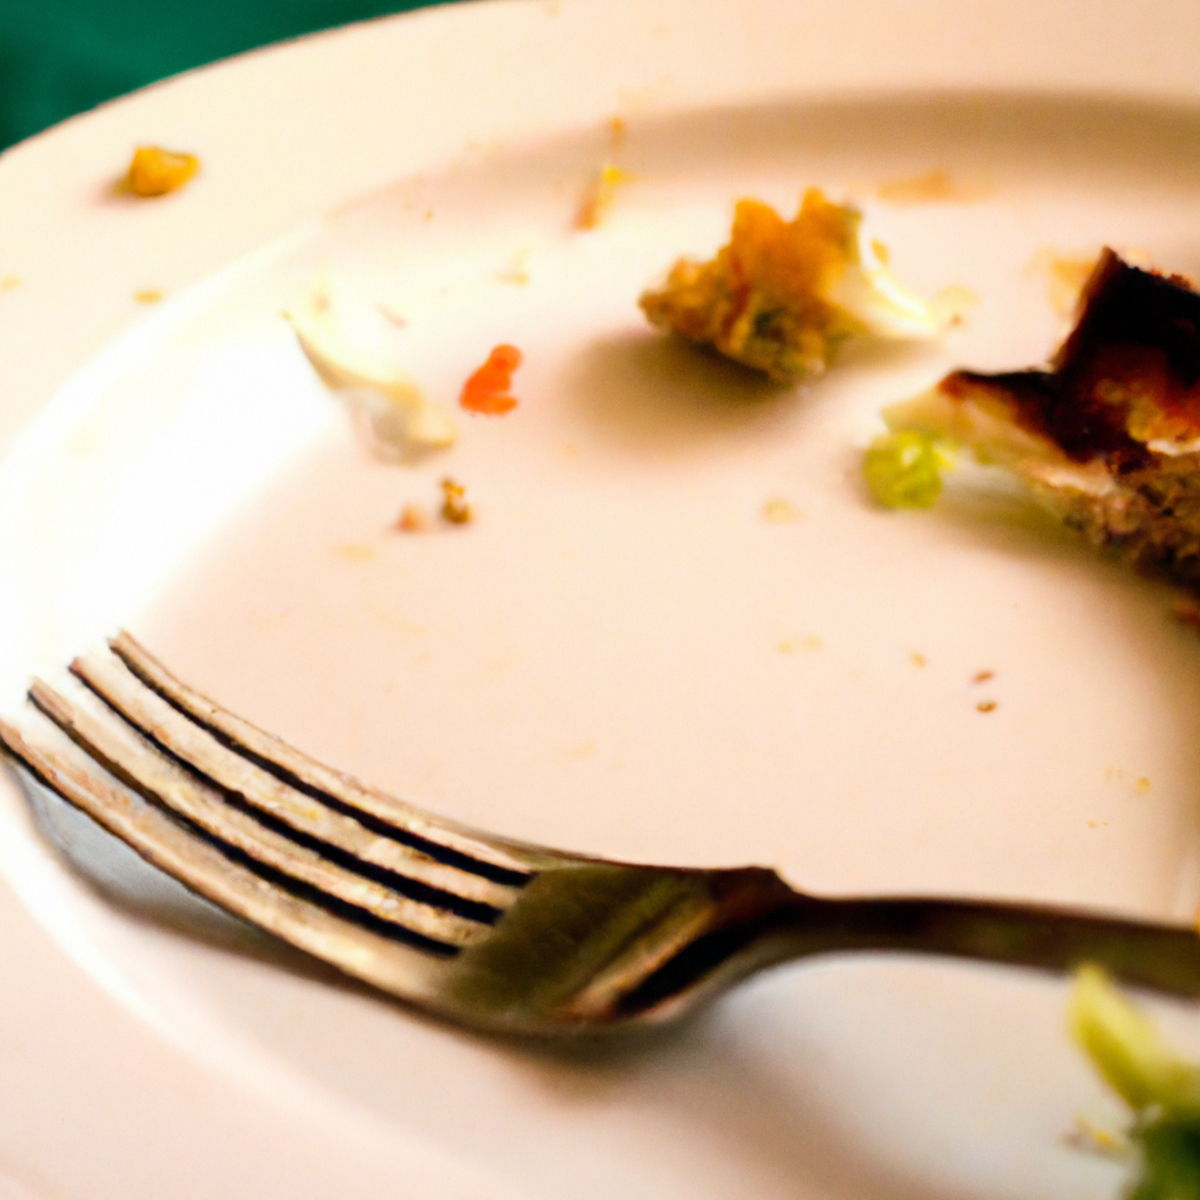 Photo of partially eaten food with signs of regurgitation, a glass of water, and a hand hovering over the plate  - Rumination syndrome